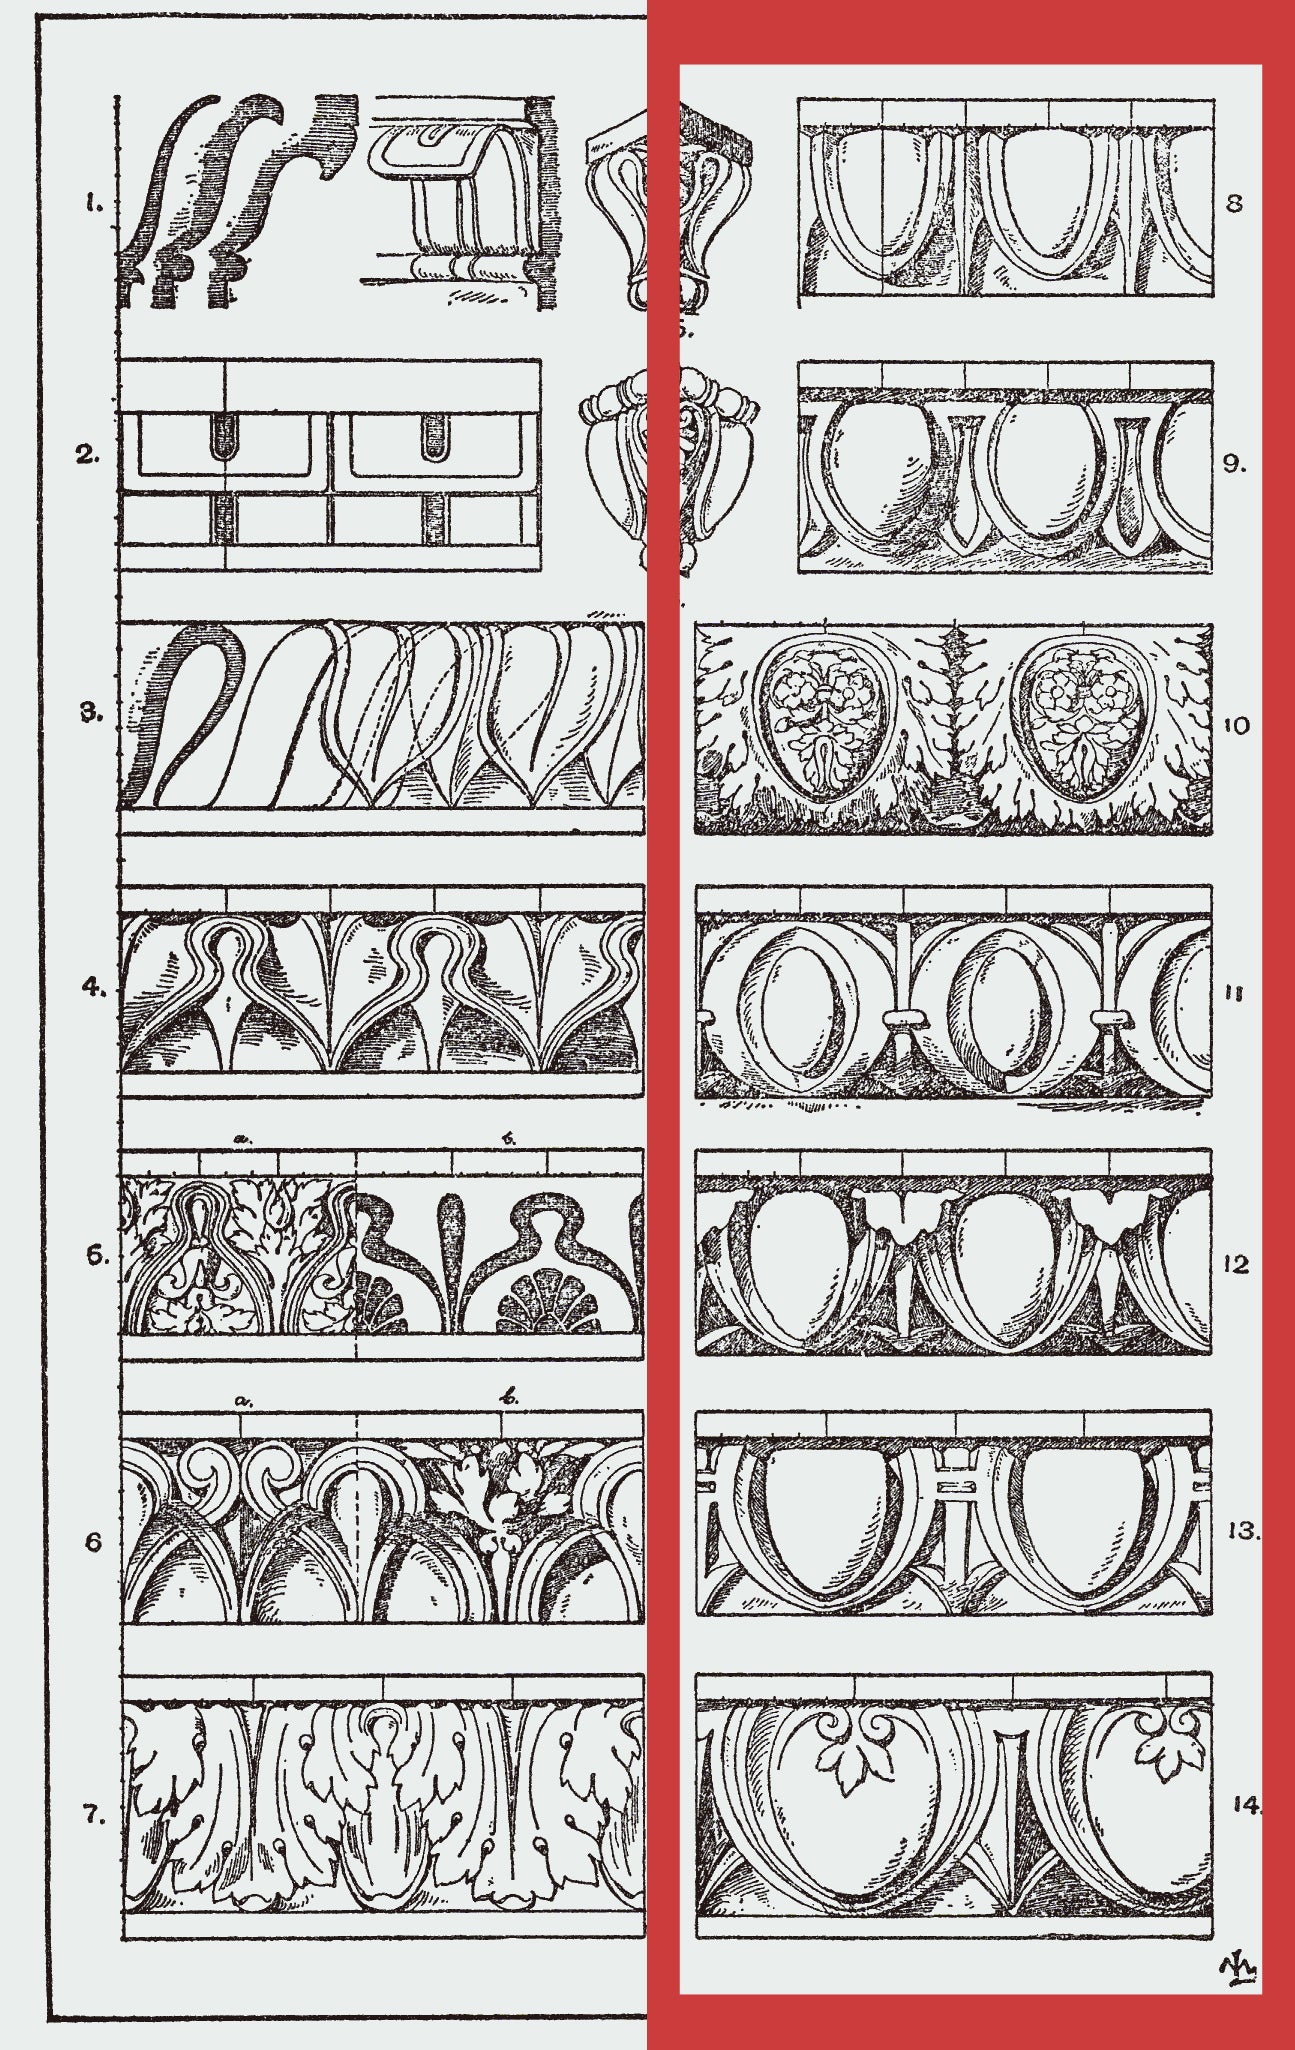 egg and dart molding sketches for brockwell incorporated's illustrated glossary of classical architectural terms